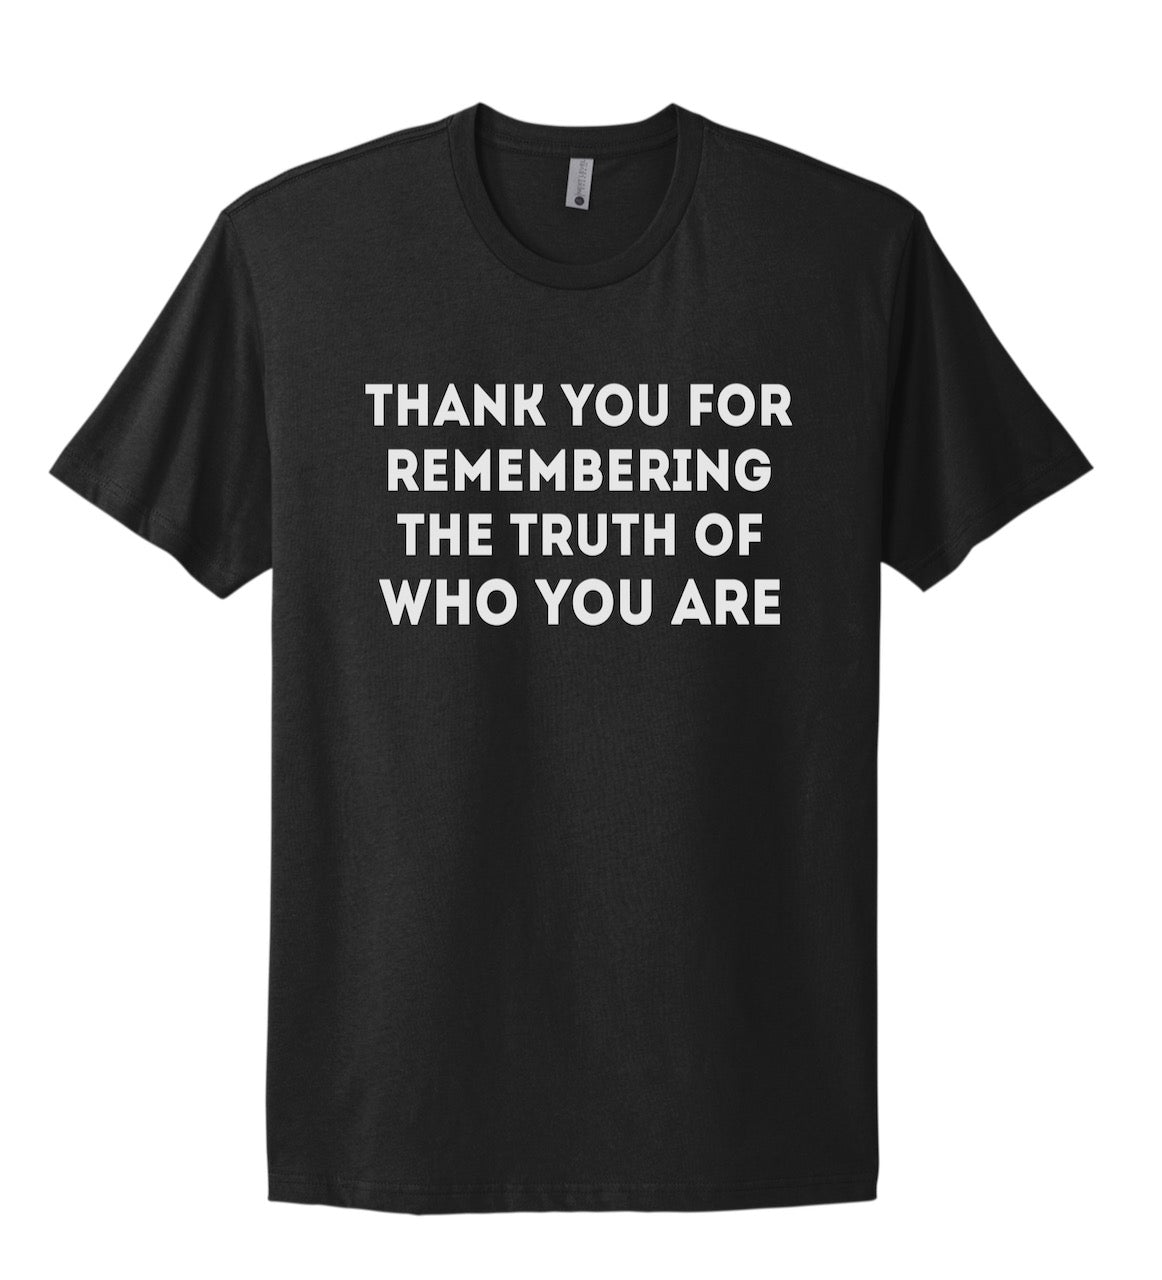 THANK YOU FOR REMEMBERING THE TRUTH OF WHO YOU ARE t-shirt